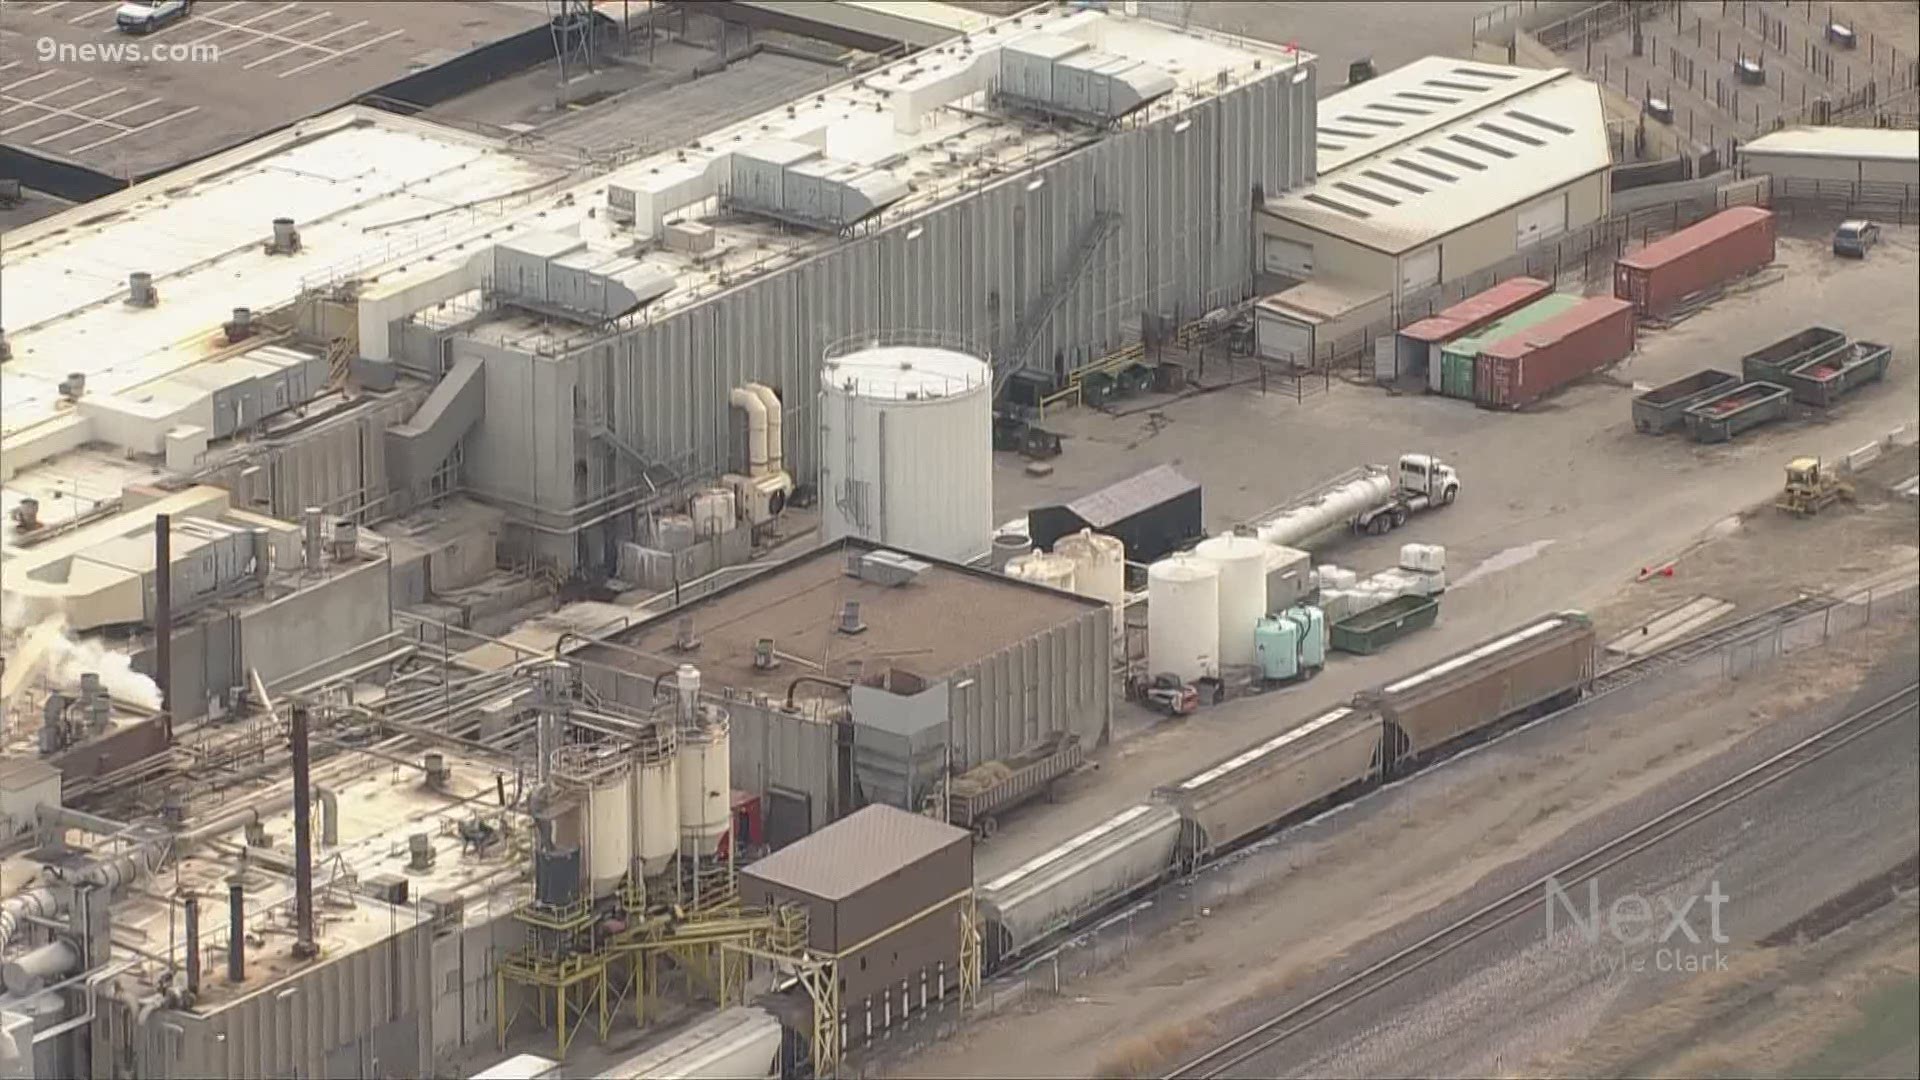 Health officials visited the Cargill meatpacking plant in Fort Morgan as the union representing employees said a staff member is believed to have died from COVID-19.